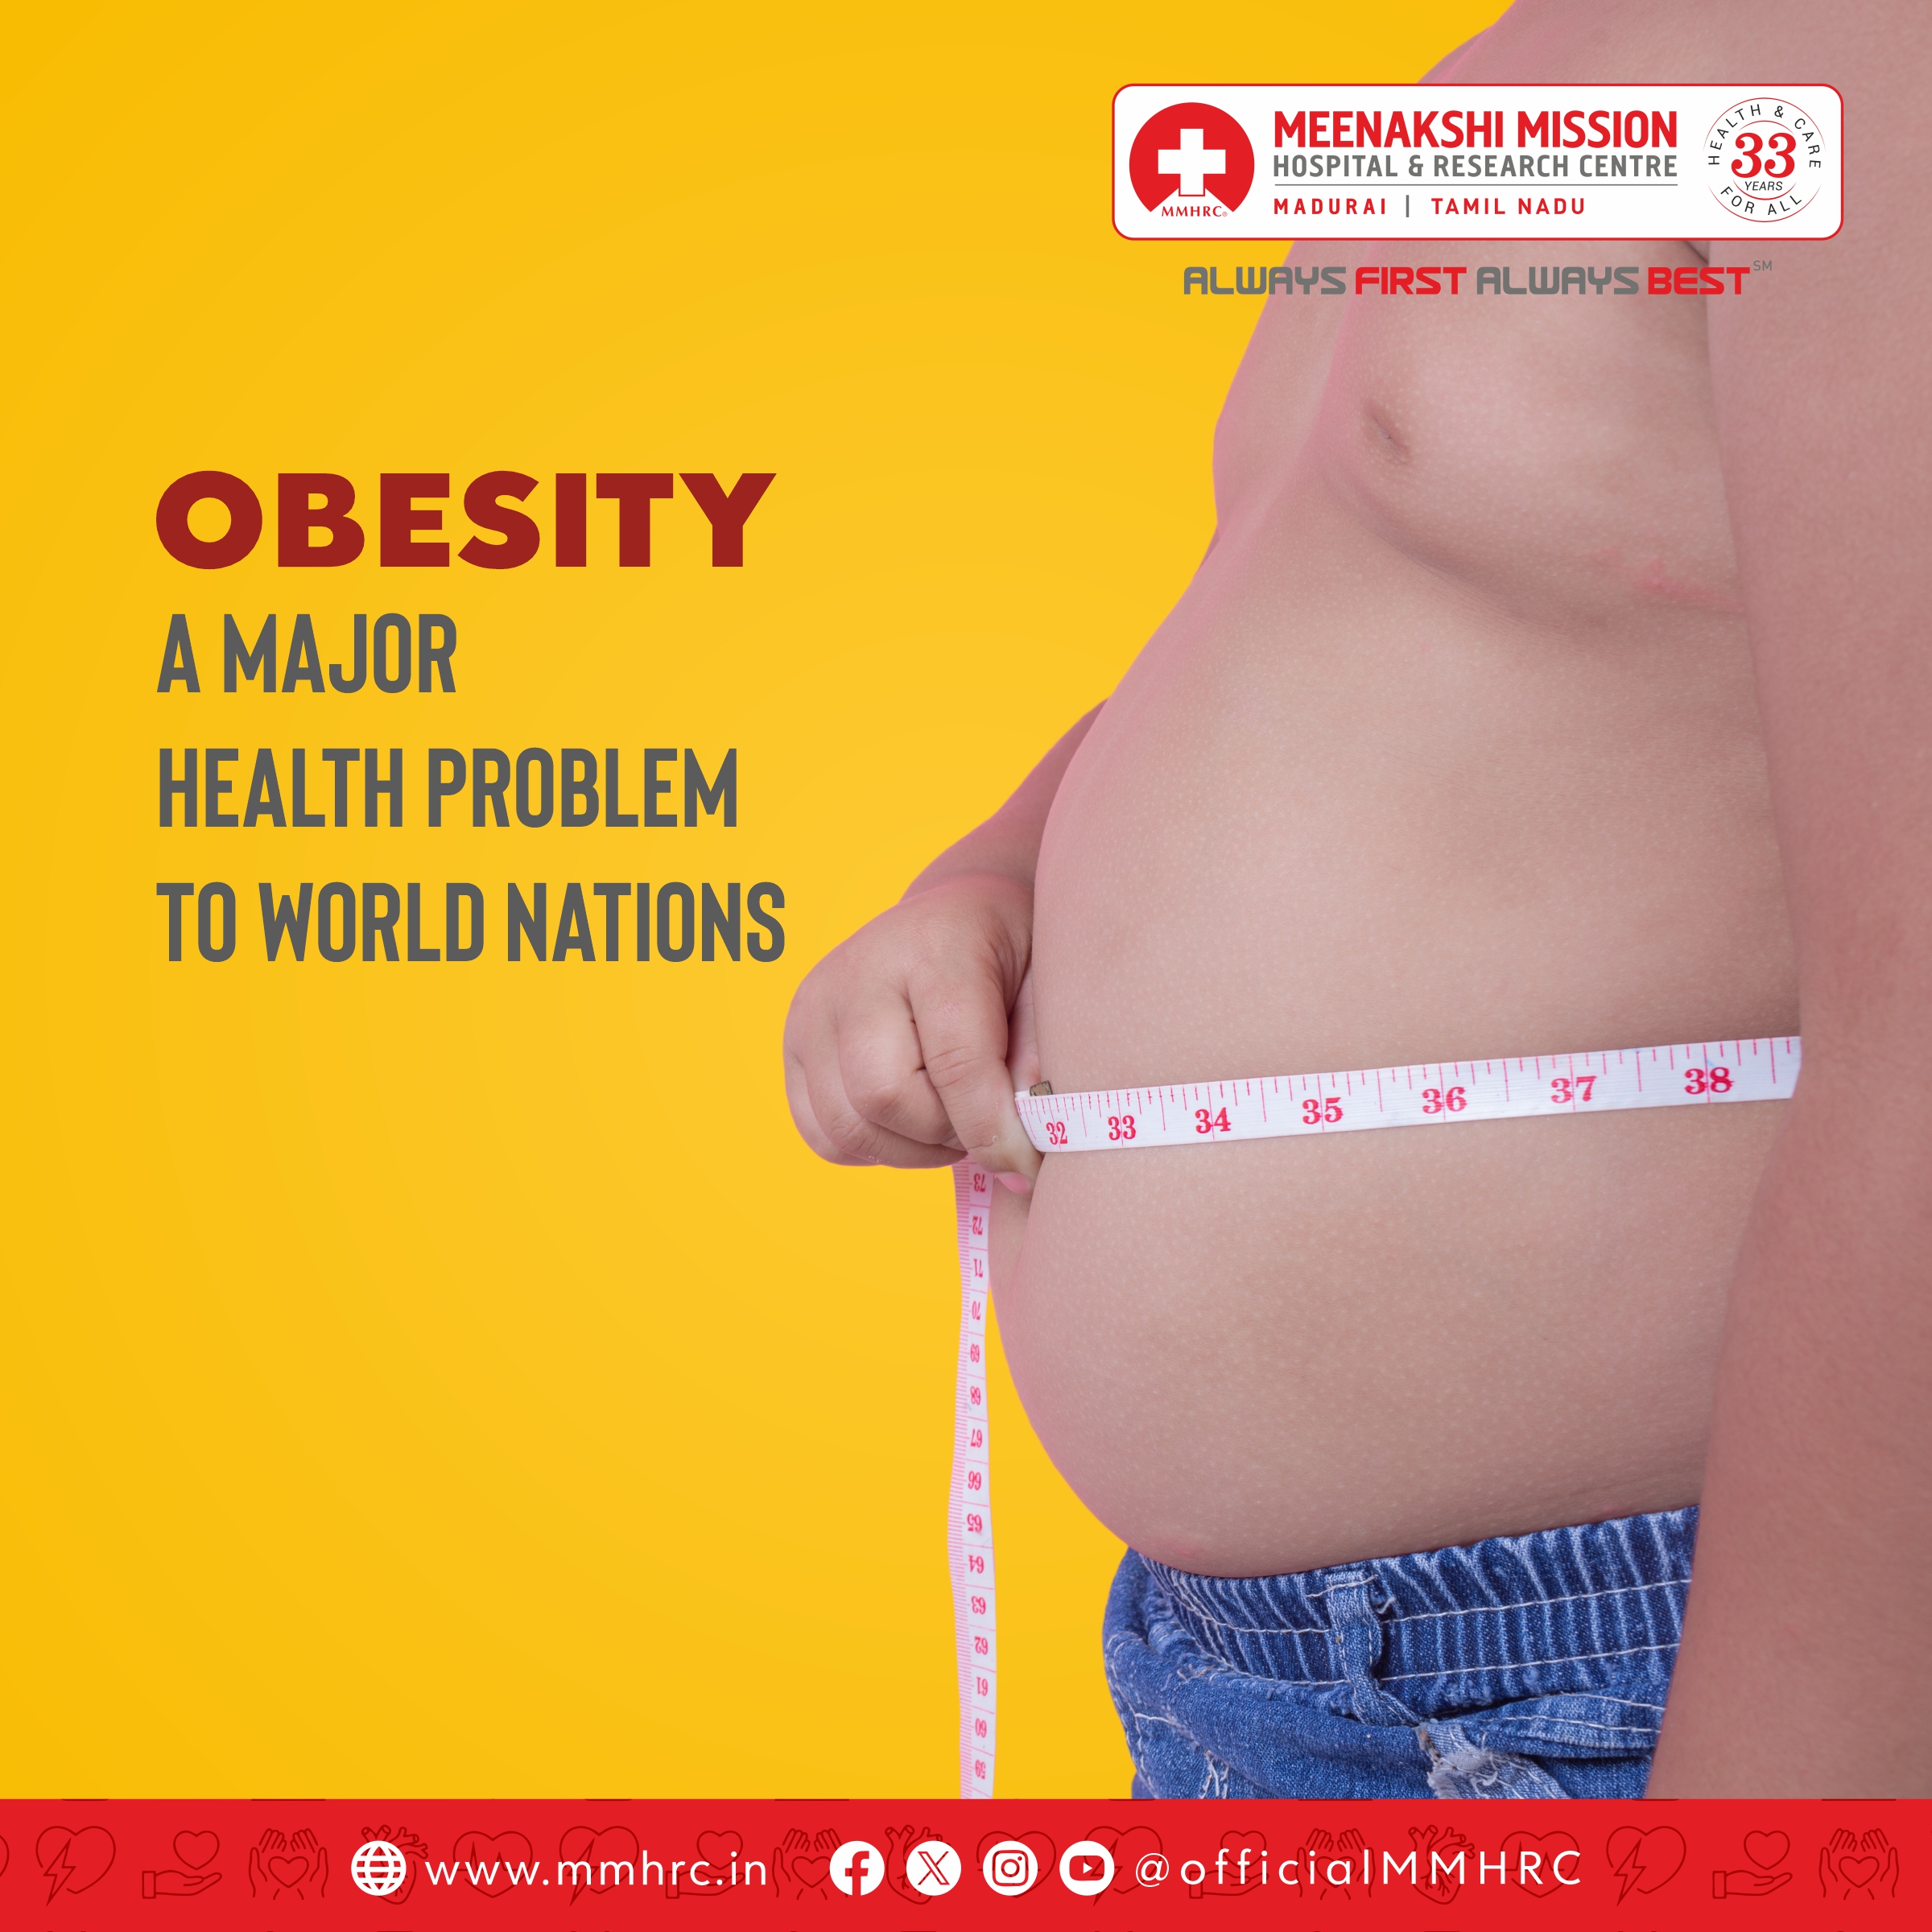 OBESITY – A MAJOR HEALTH PROBLEM TO WORLD NATIONS